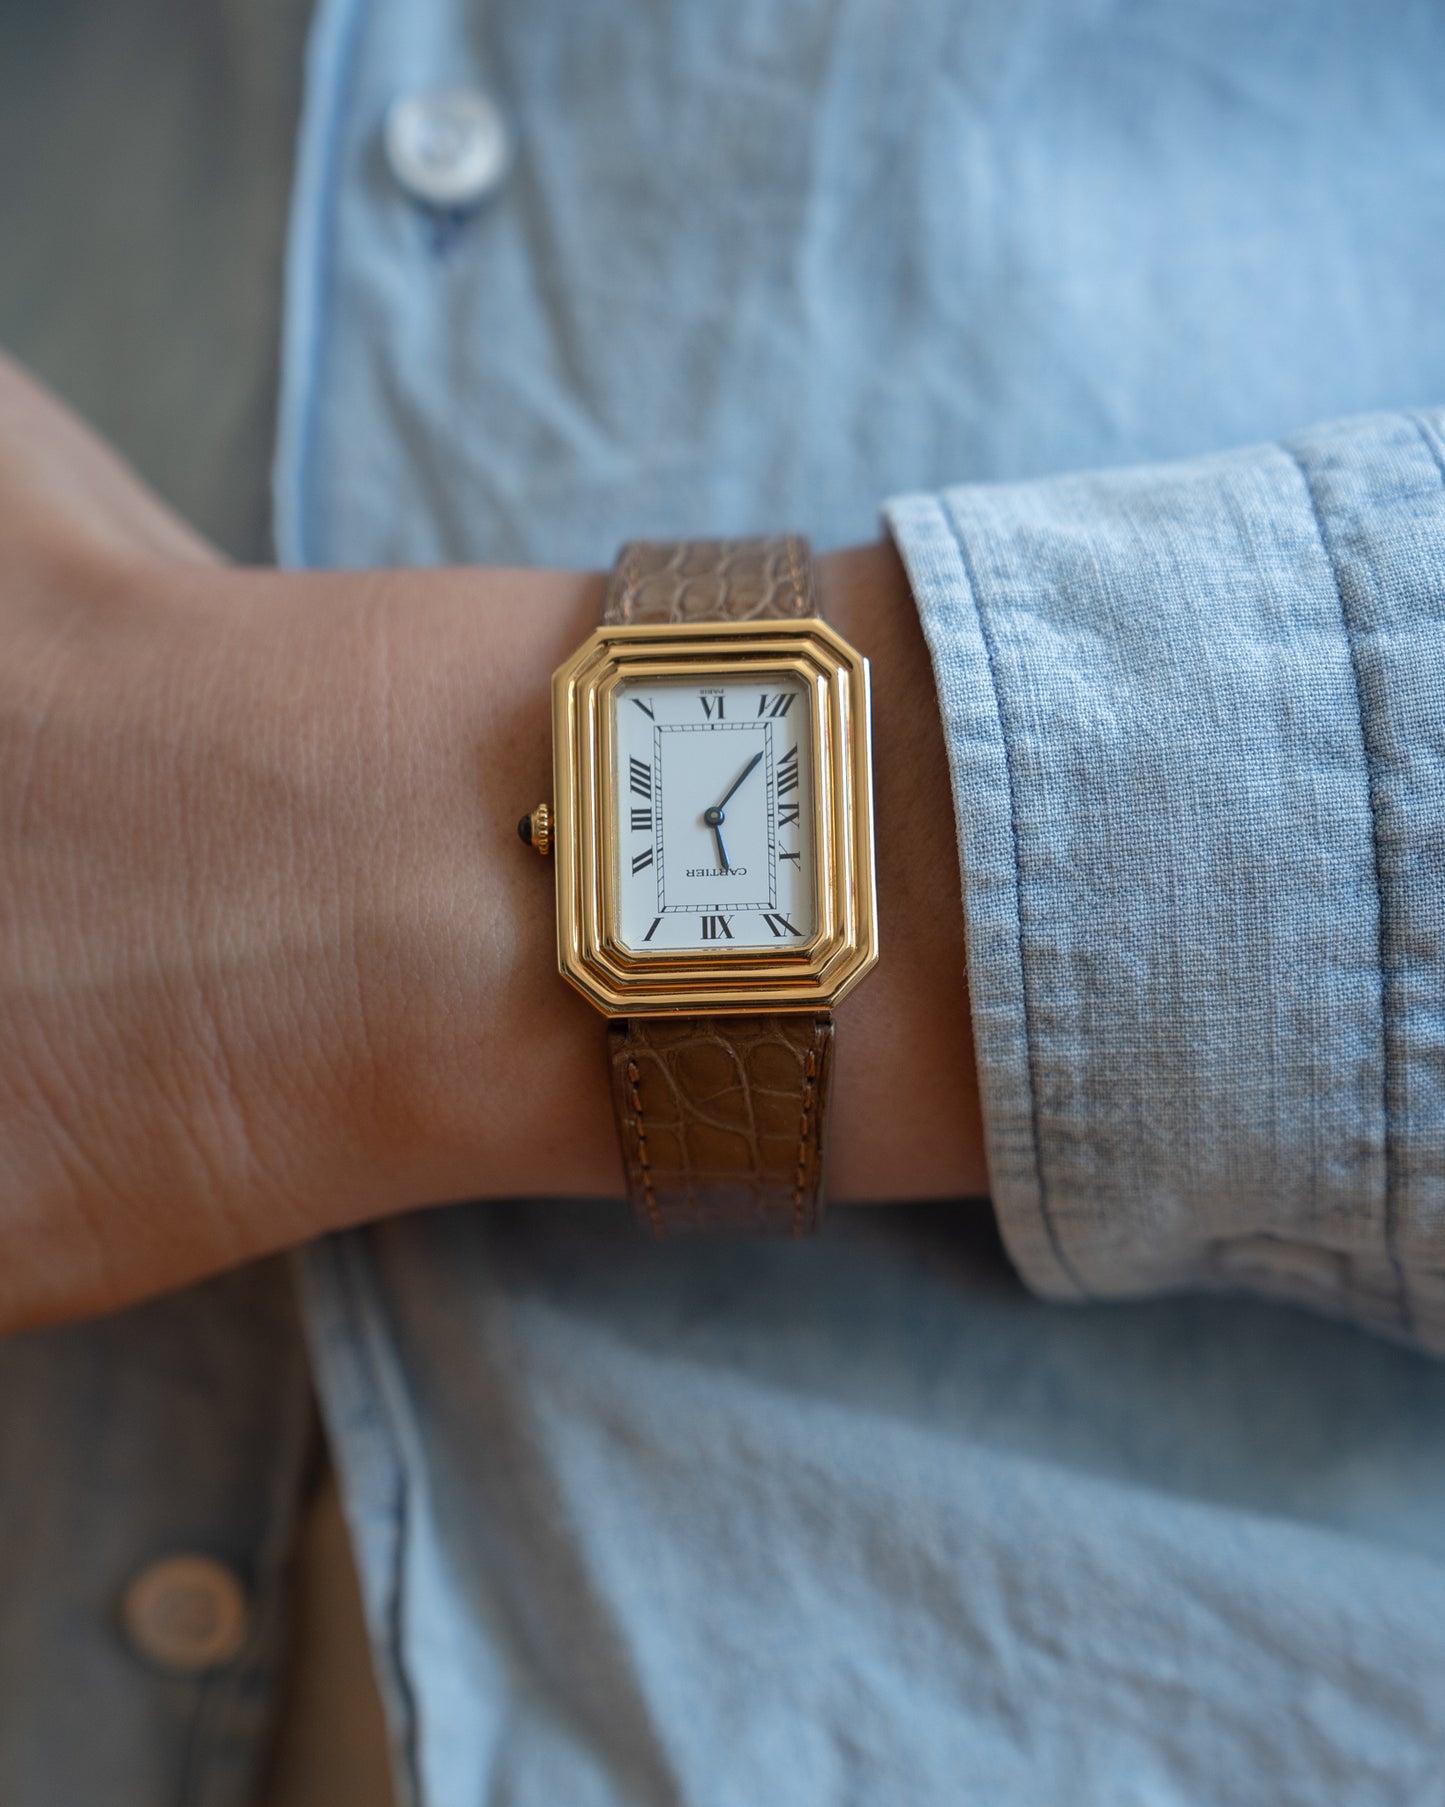 Cartier Cristallor 18k Yellow Gold, LM size, Paris Dial - box & guarantee (Price on Request)